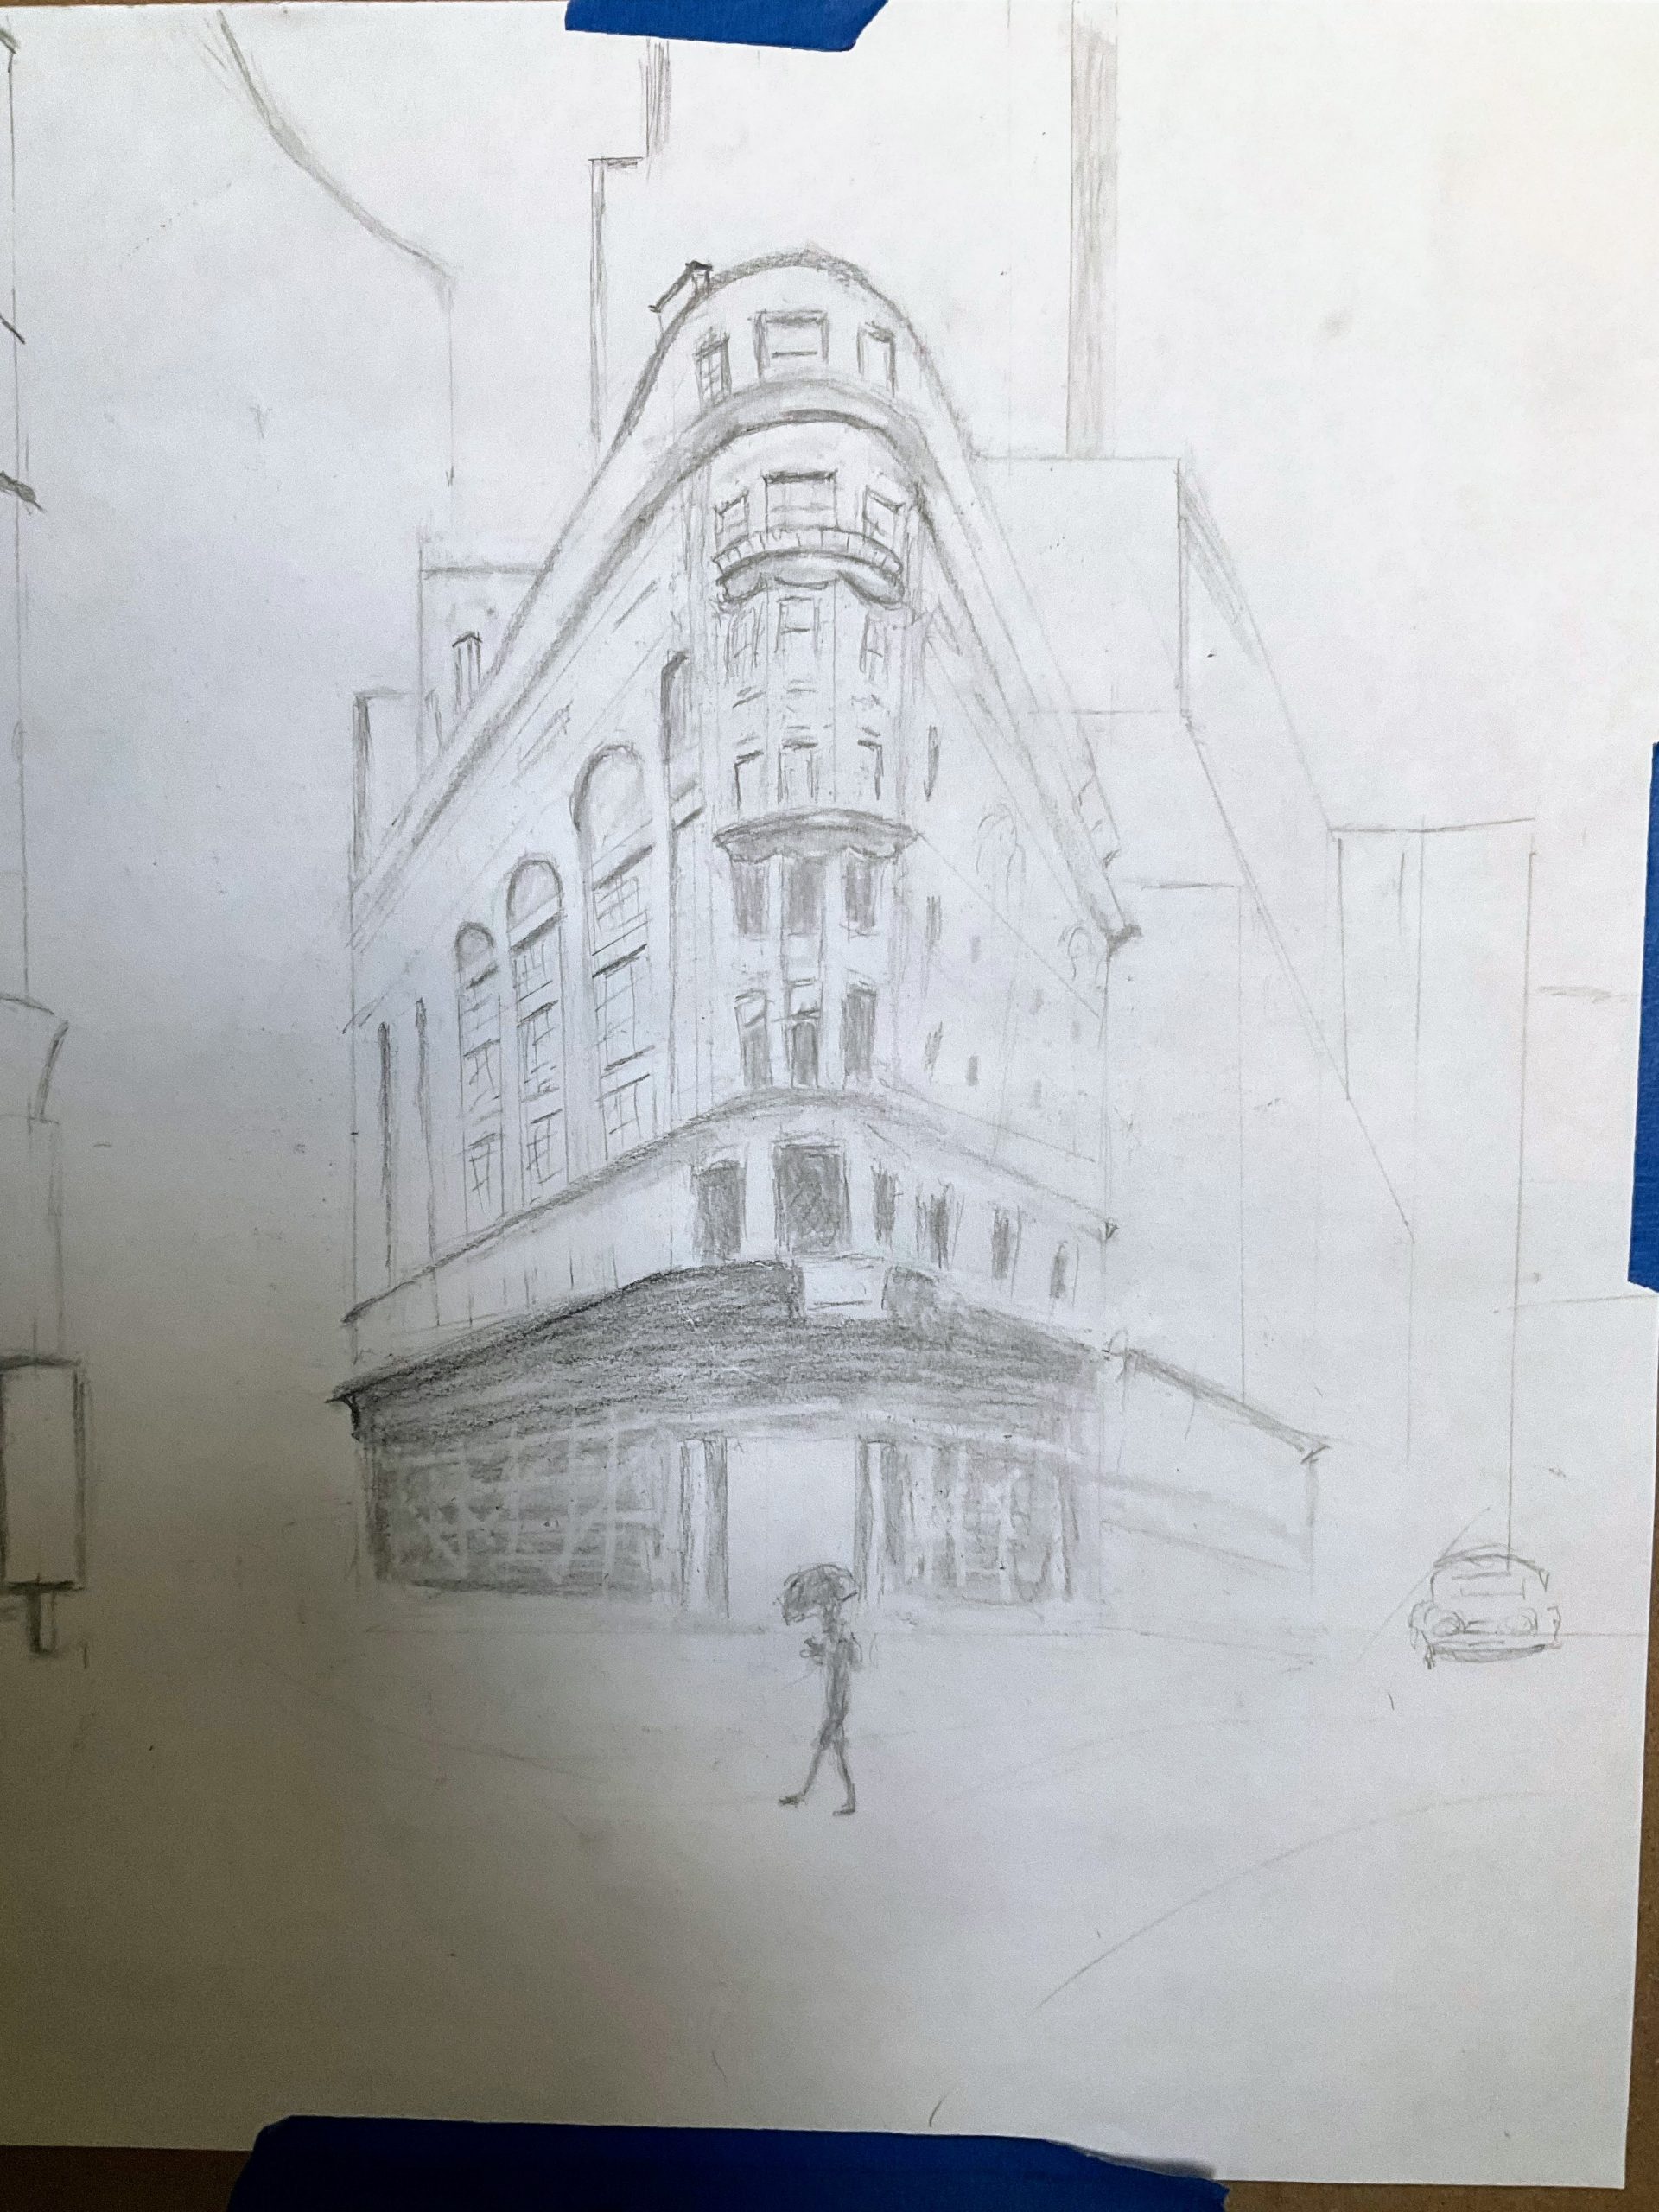 Pencils Sketch of the Flatiron Building in New York City
